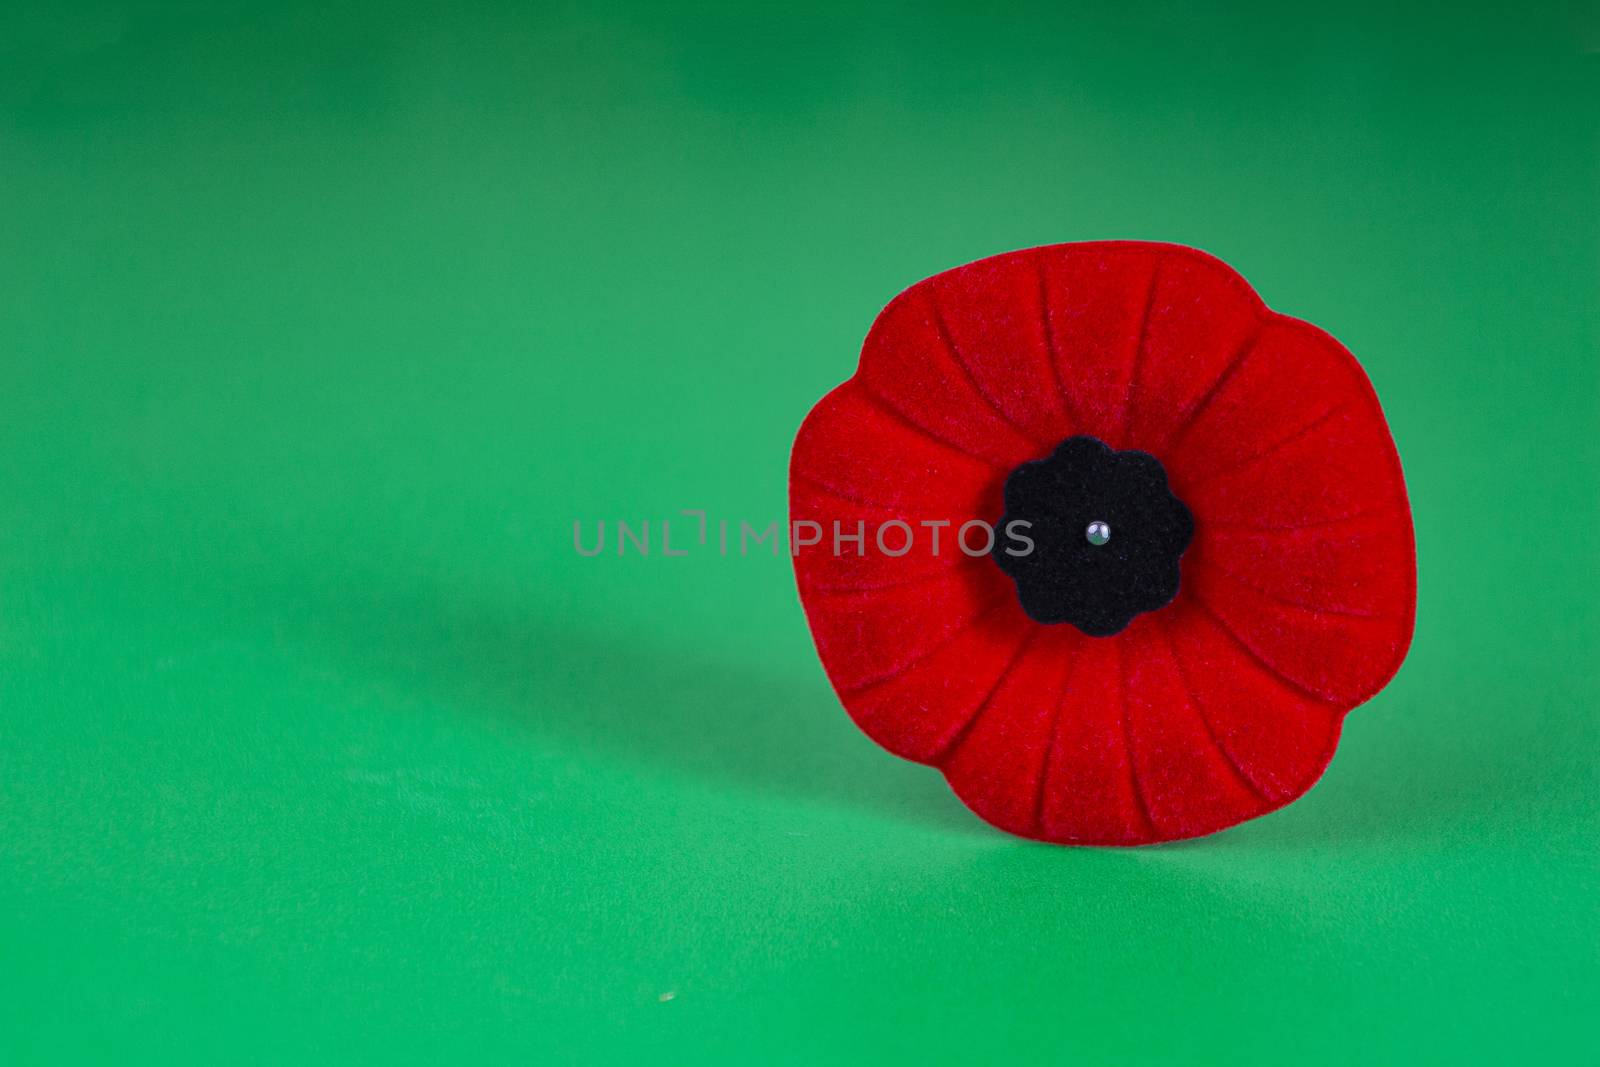 Remembrance Day Poppy Flower with a green Background by oasisamuel